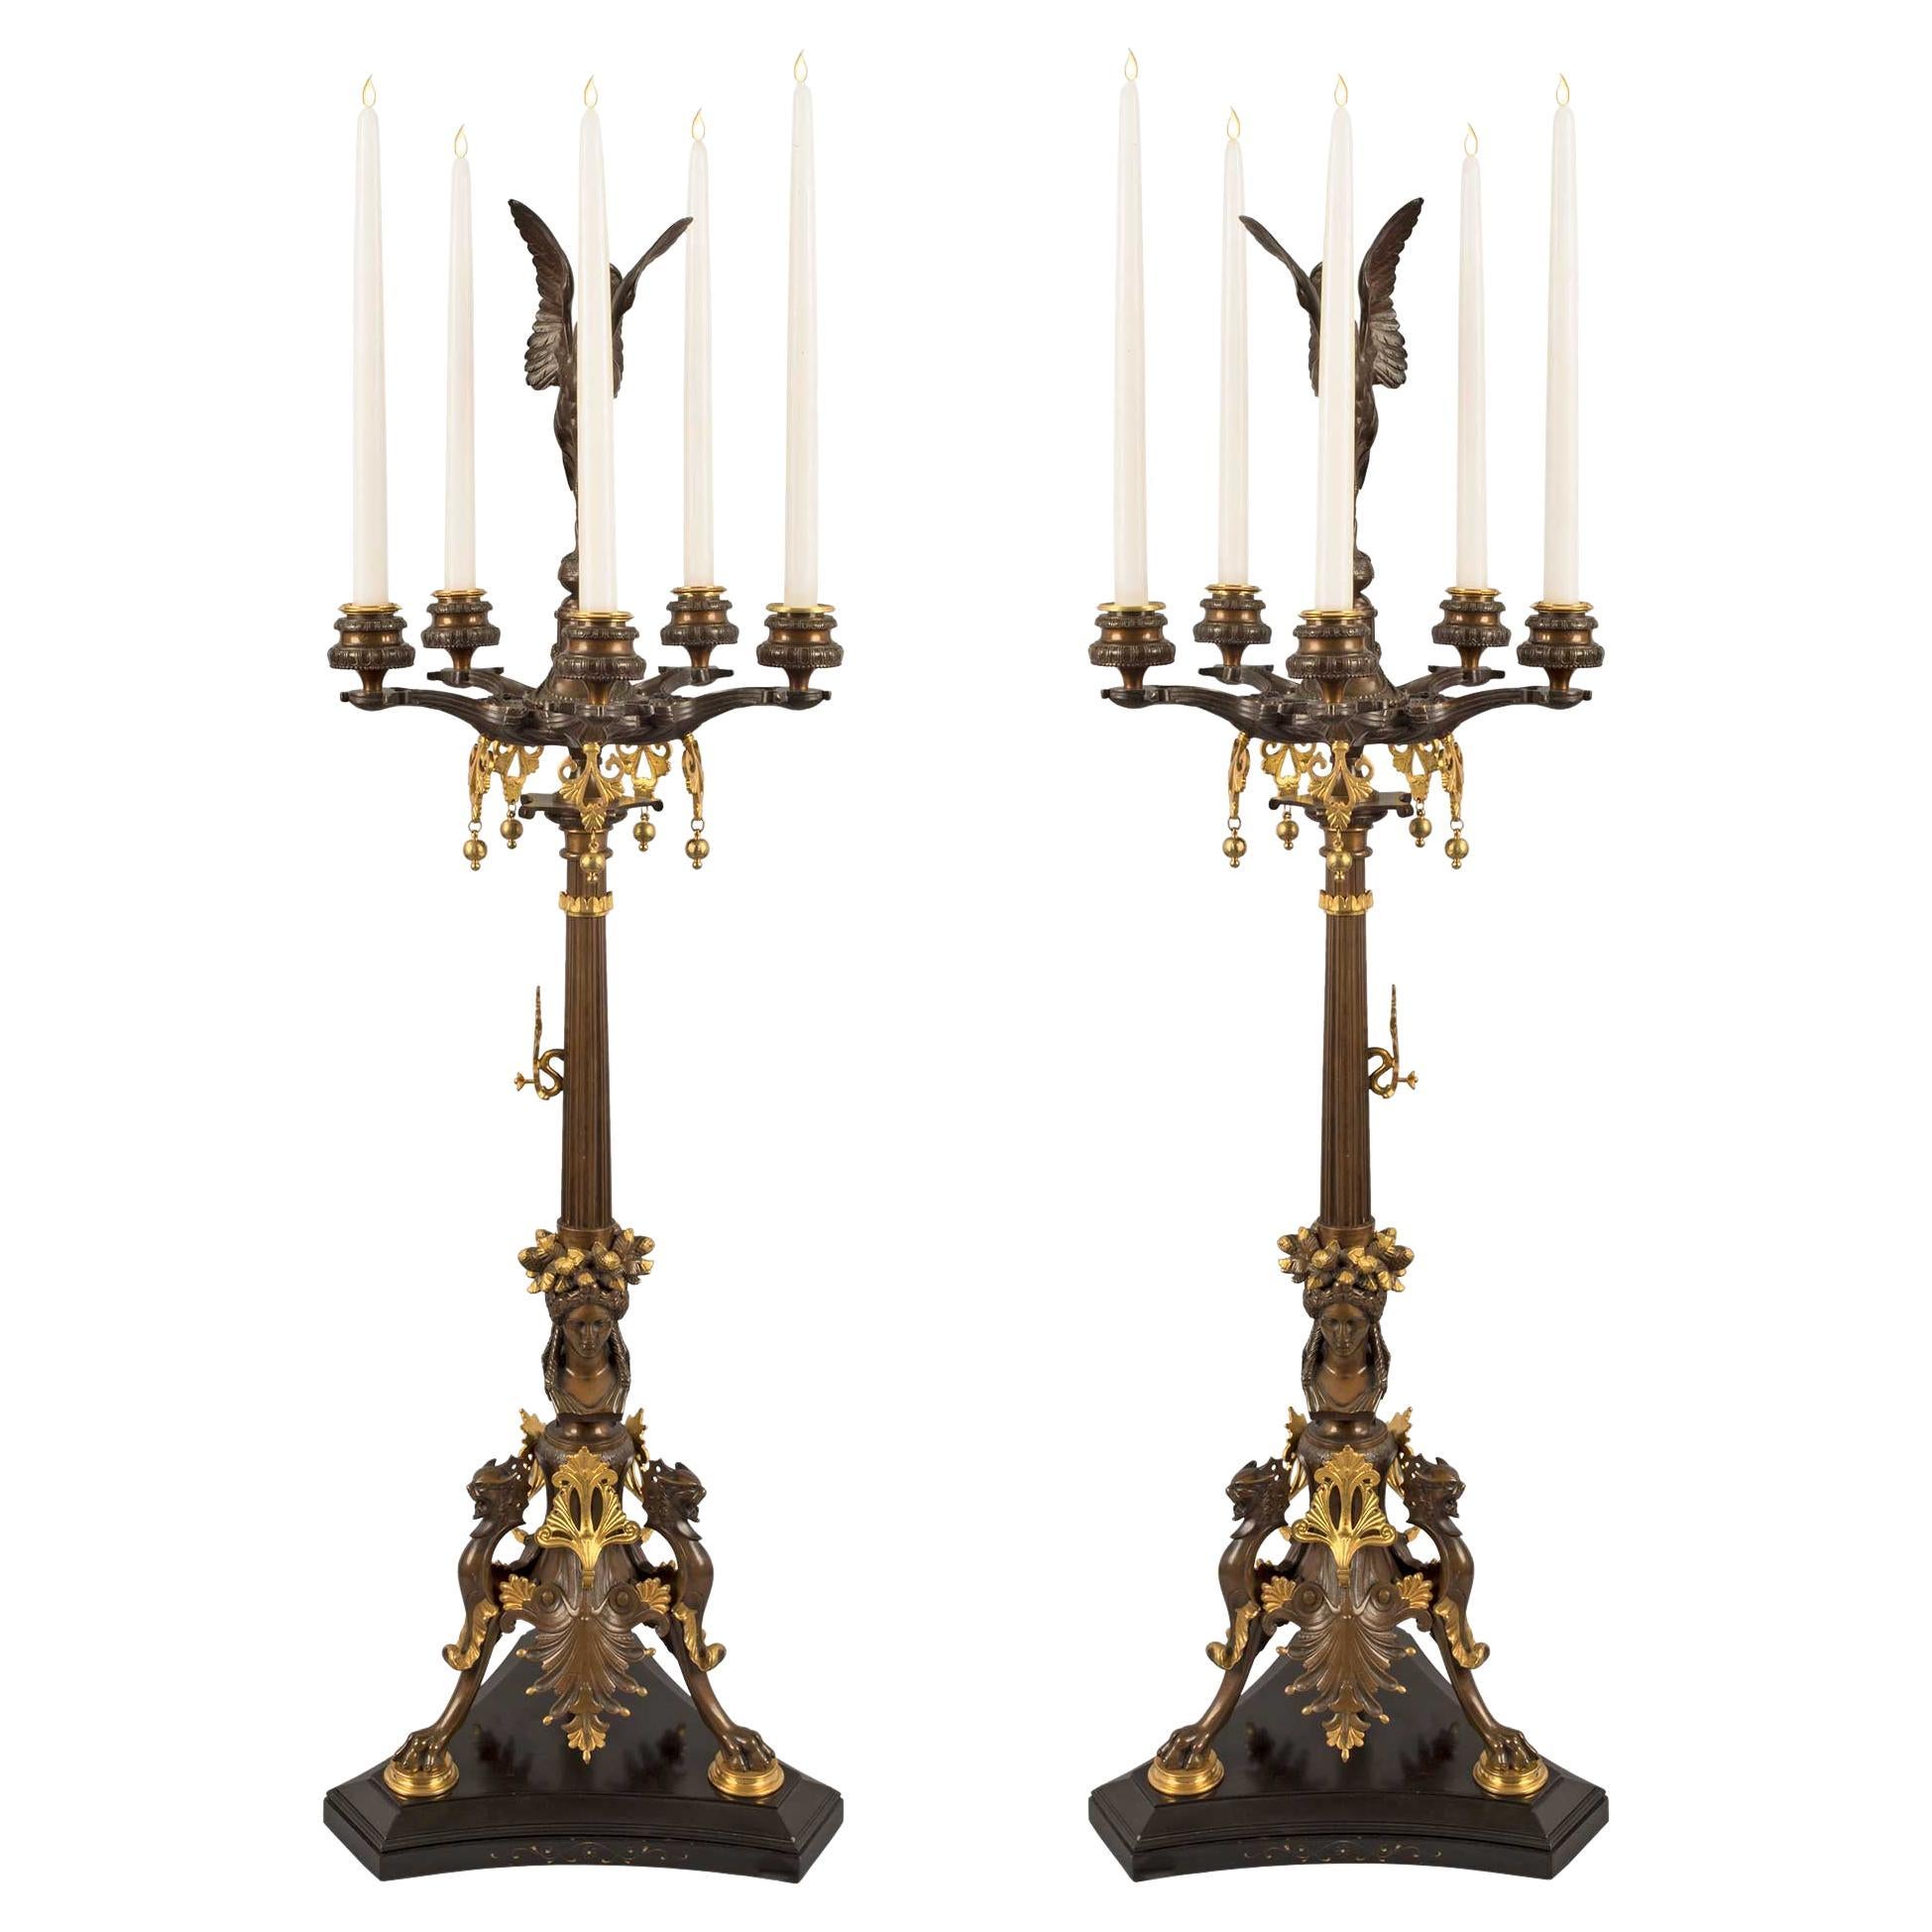 French 19th Century Renaissance Style Ormolu and Patinated Bronze Candelabras For Sale